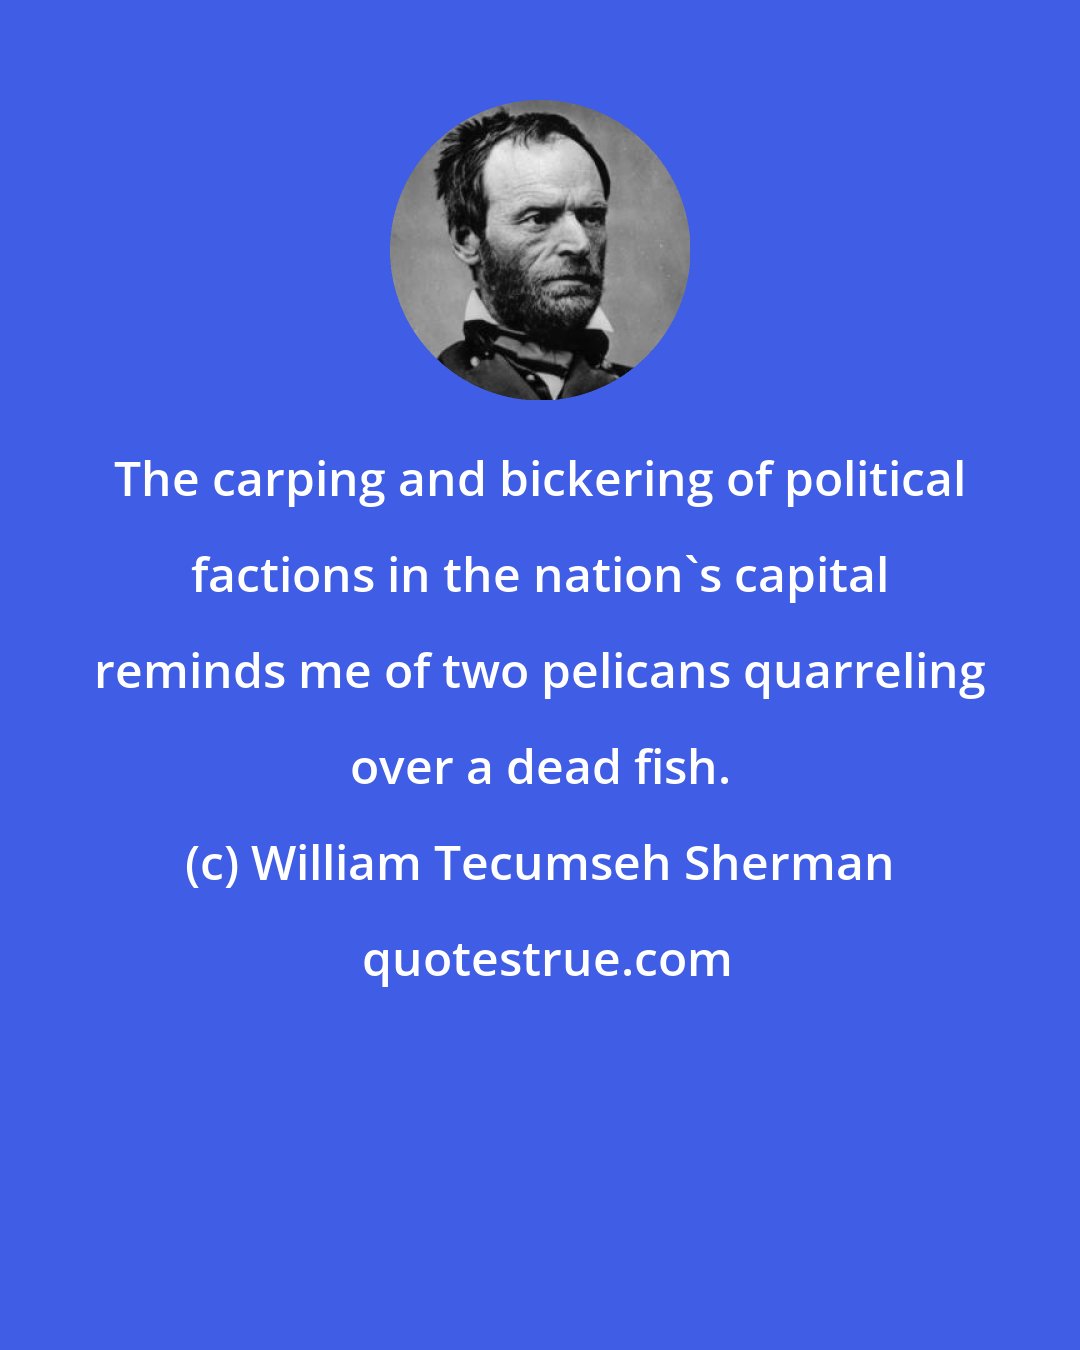 William Tecumseh Sherman: The carping and bickering of political factions in the nation's capital reminds me of two pelicans quarreling over a dead fish.